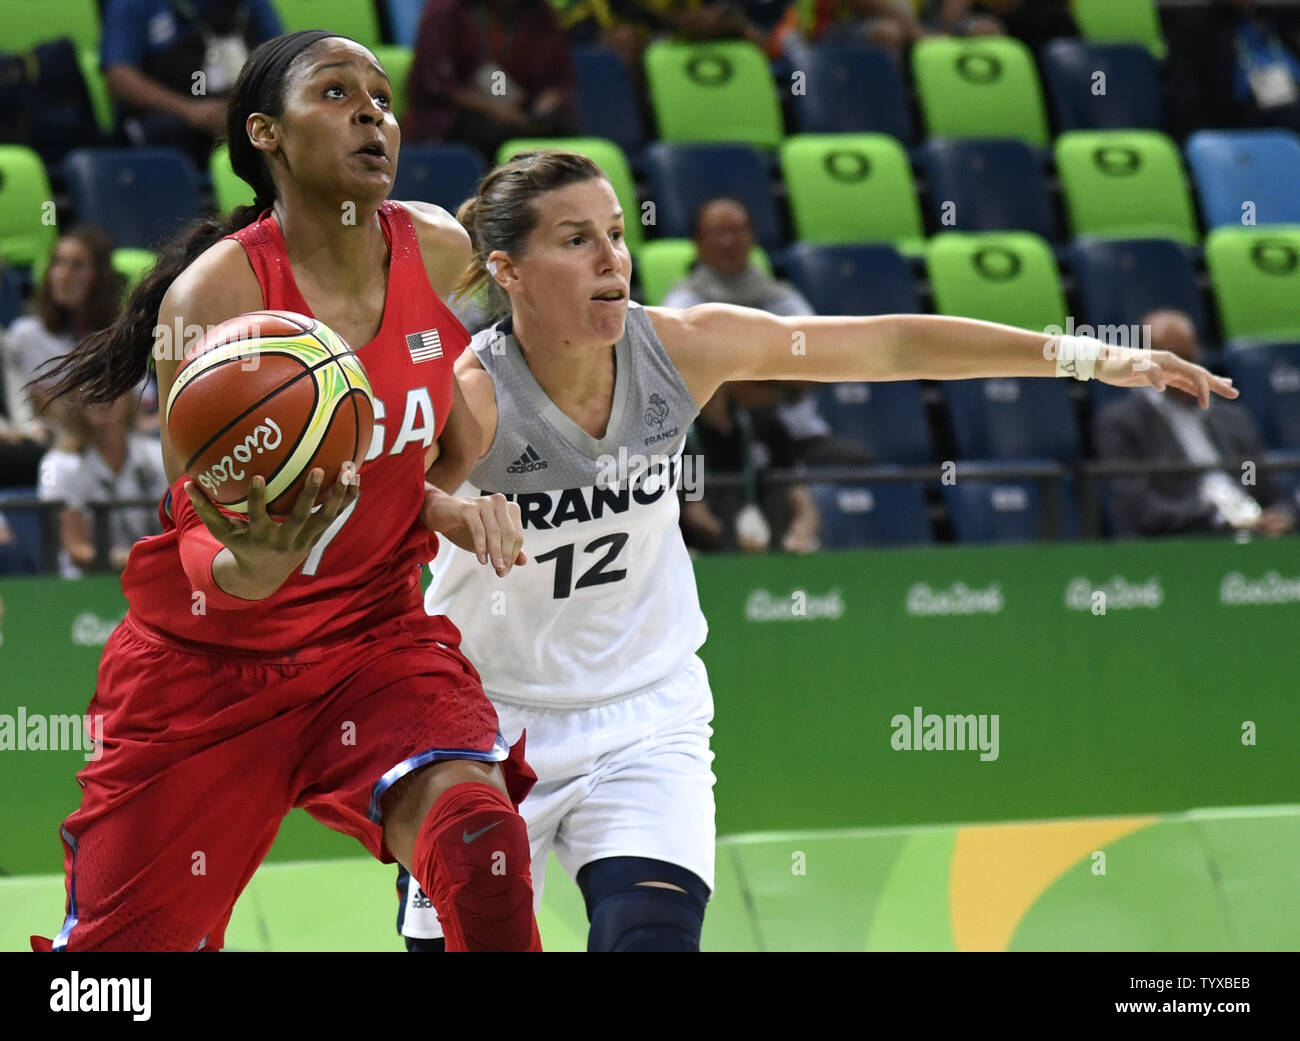 United States' Maya Moore dribbles to the basket against France's Gaelle  Skrela during the USA vs France Women's Basketball game at the 2016 Rio  Summer Olympics in Rio de Janeiro, Brazil, August